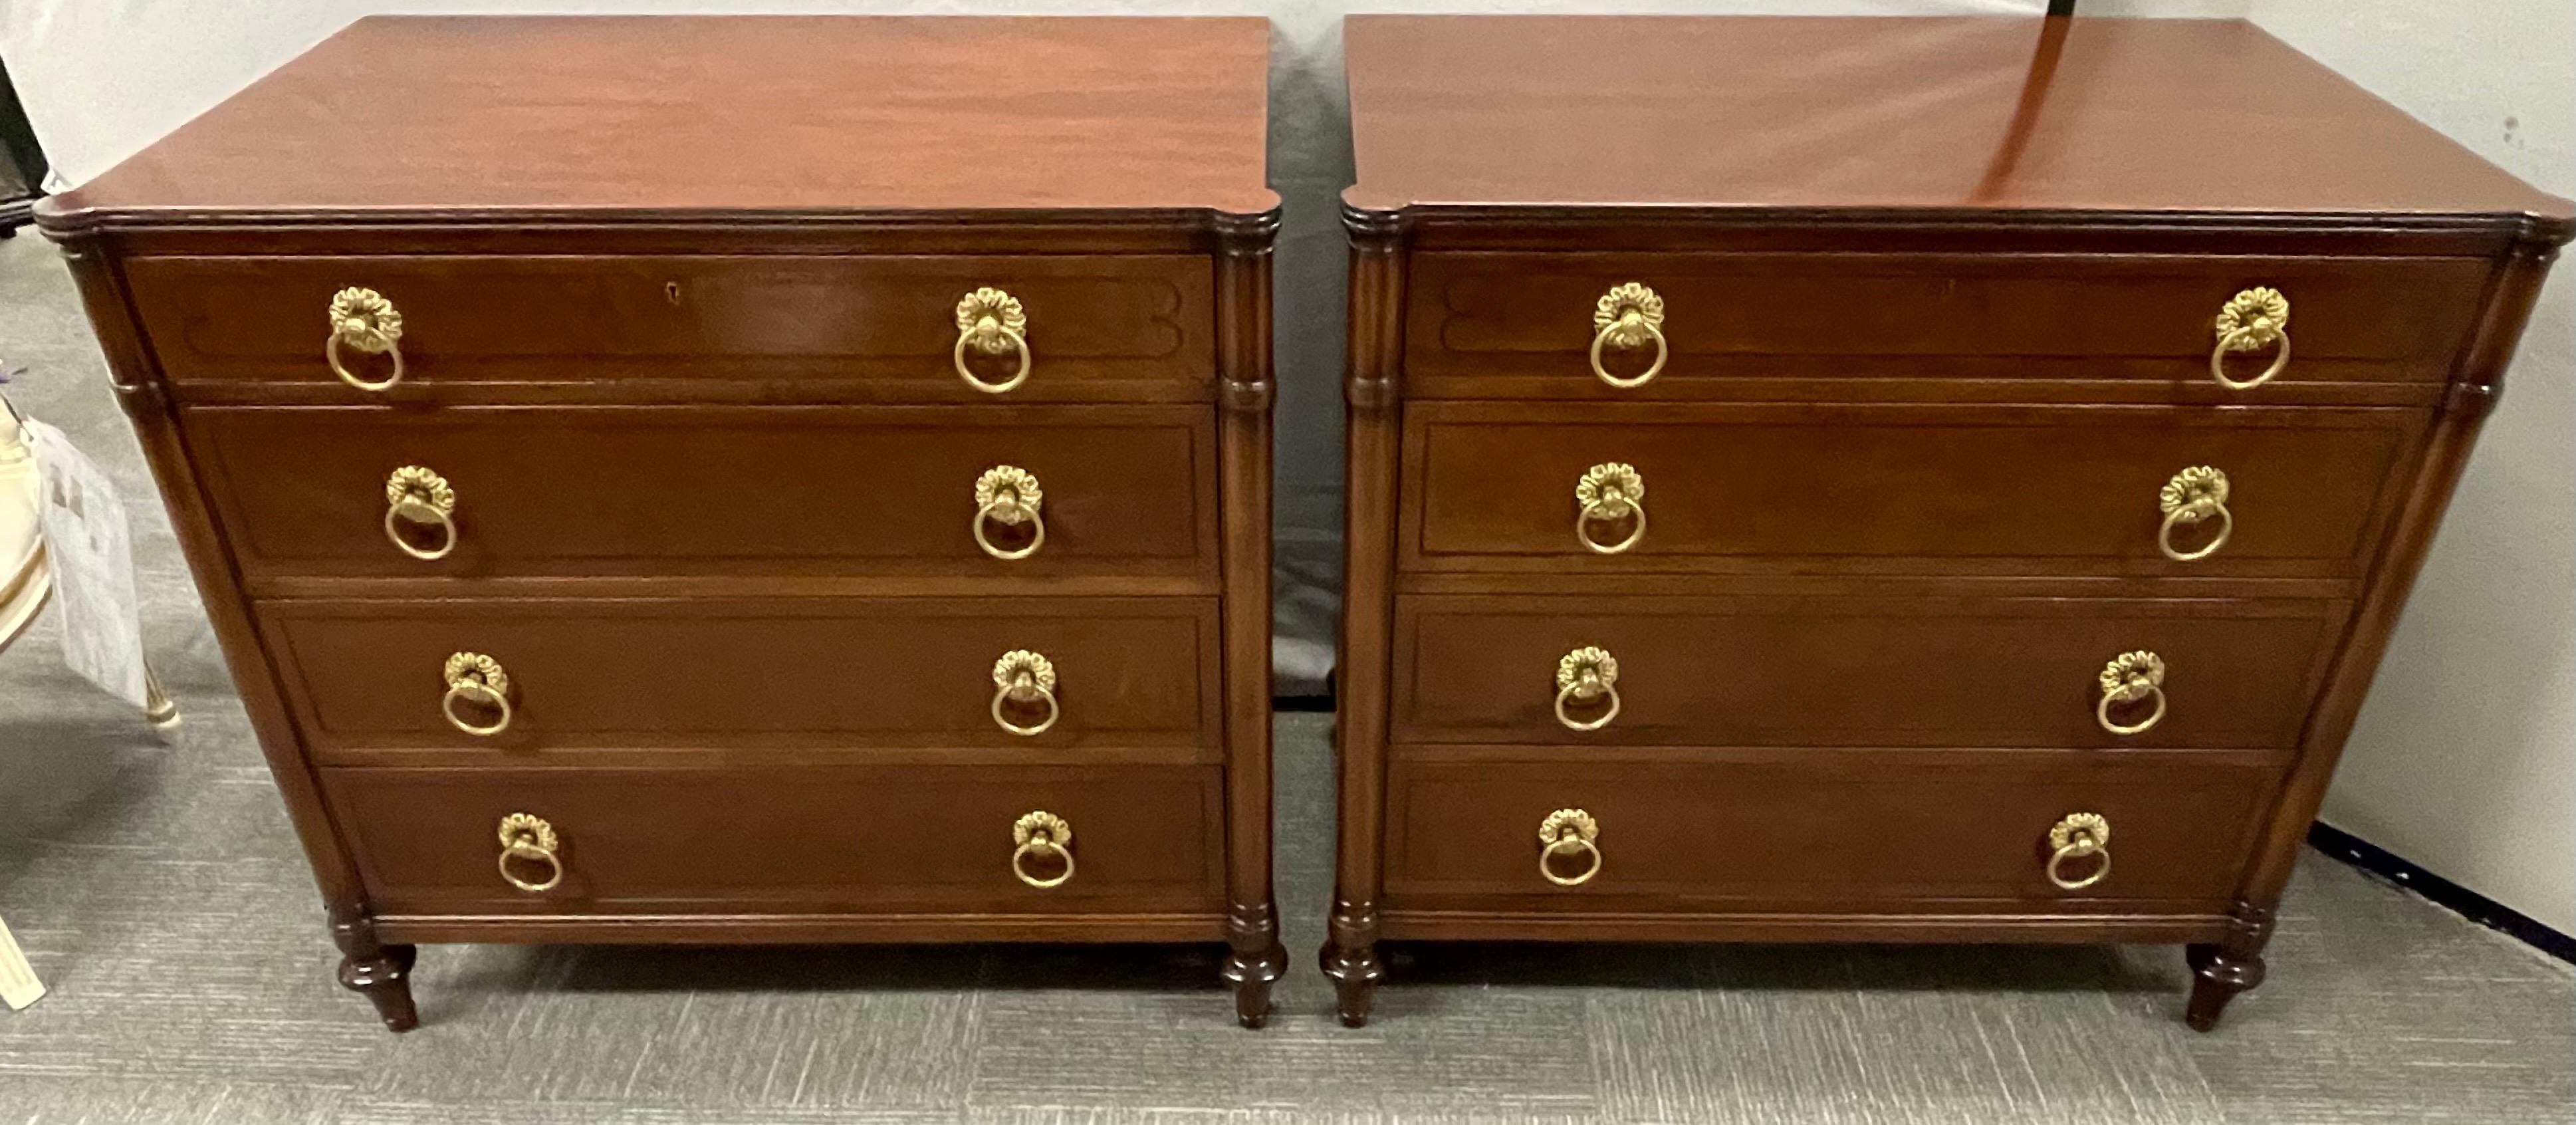 American Pair of Kittinger Commodes, Nightstands or Chests